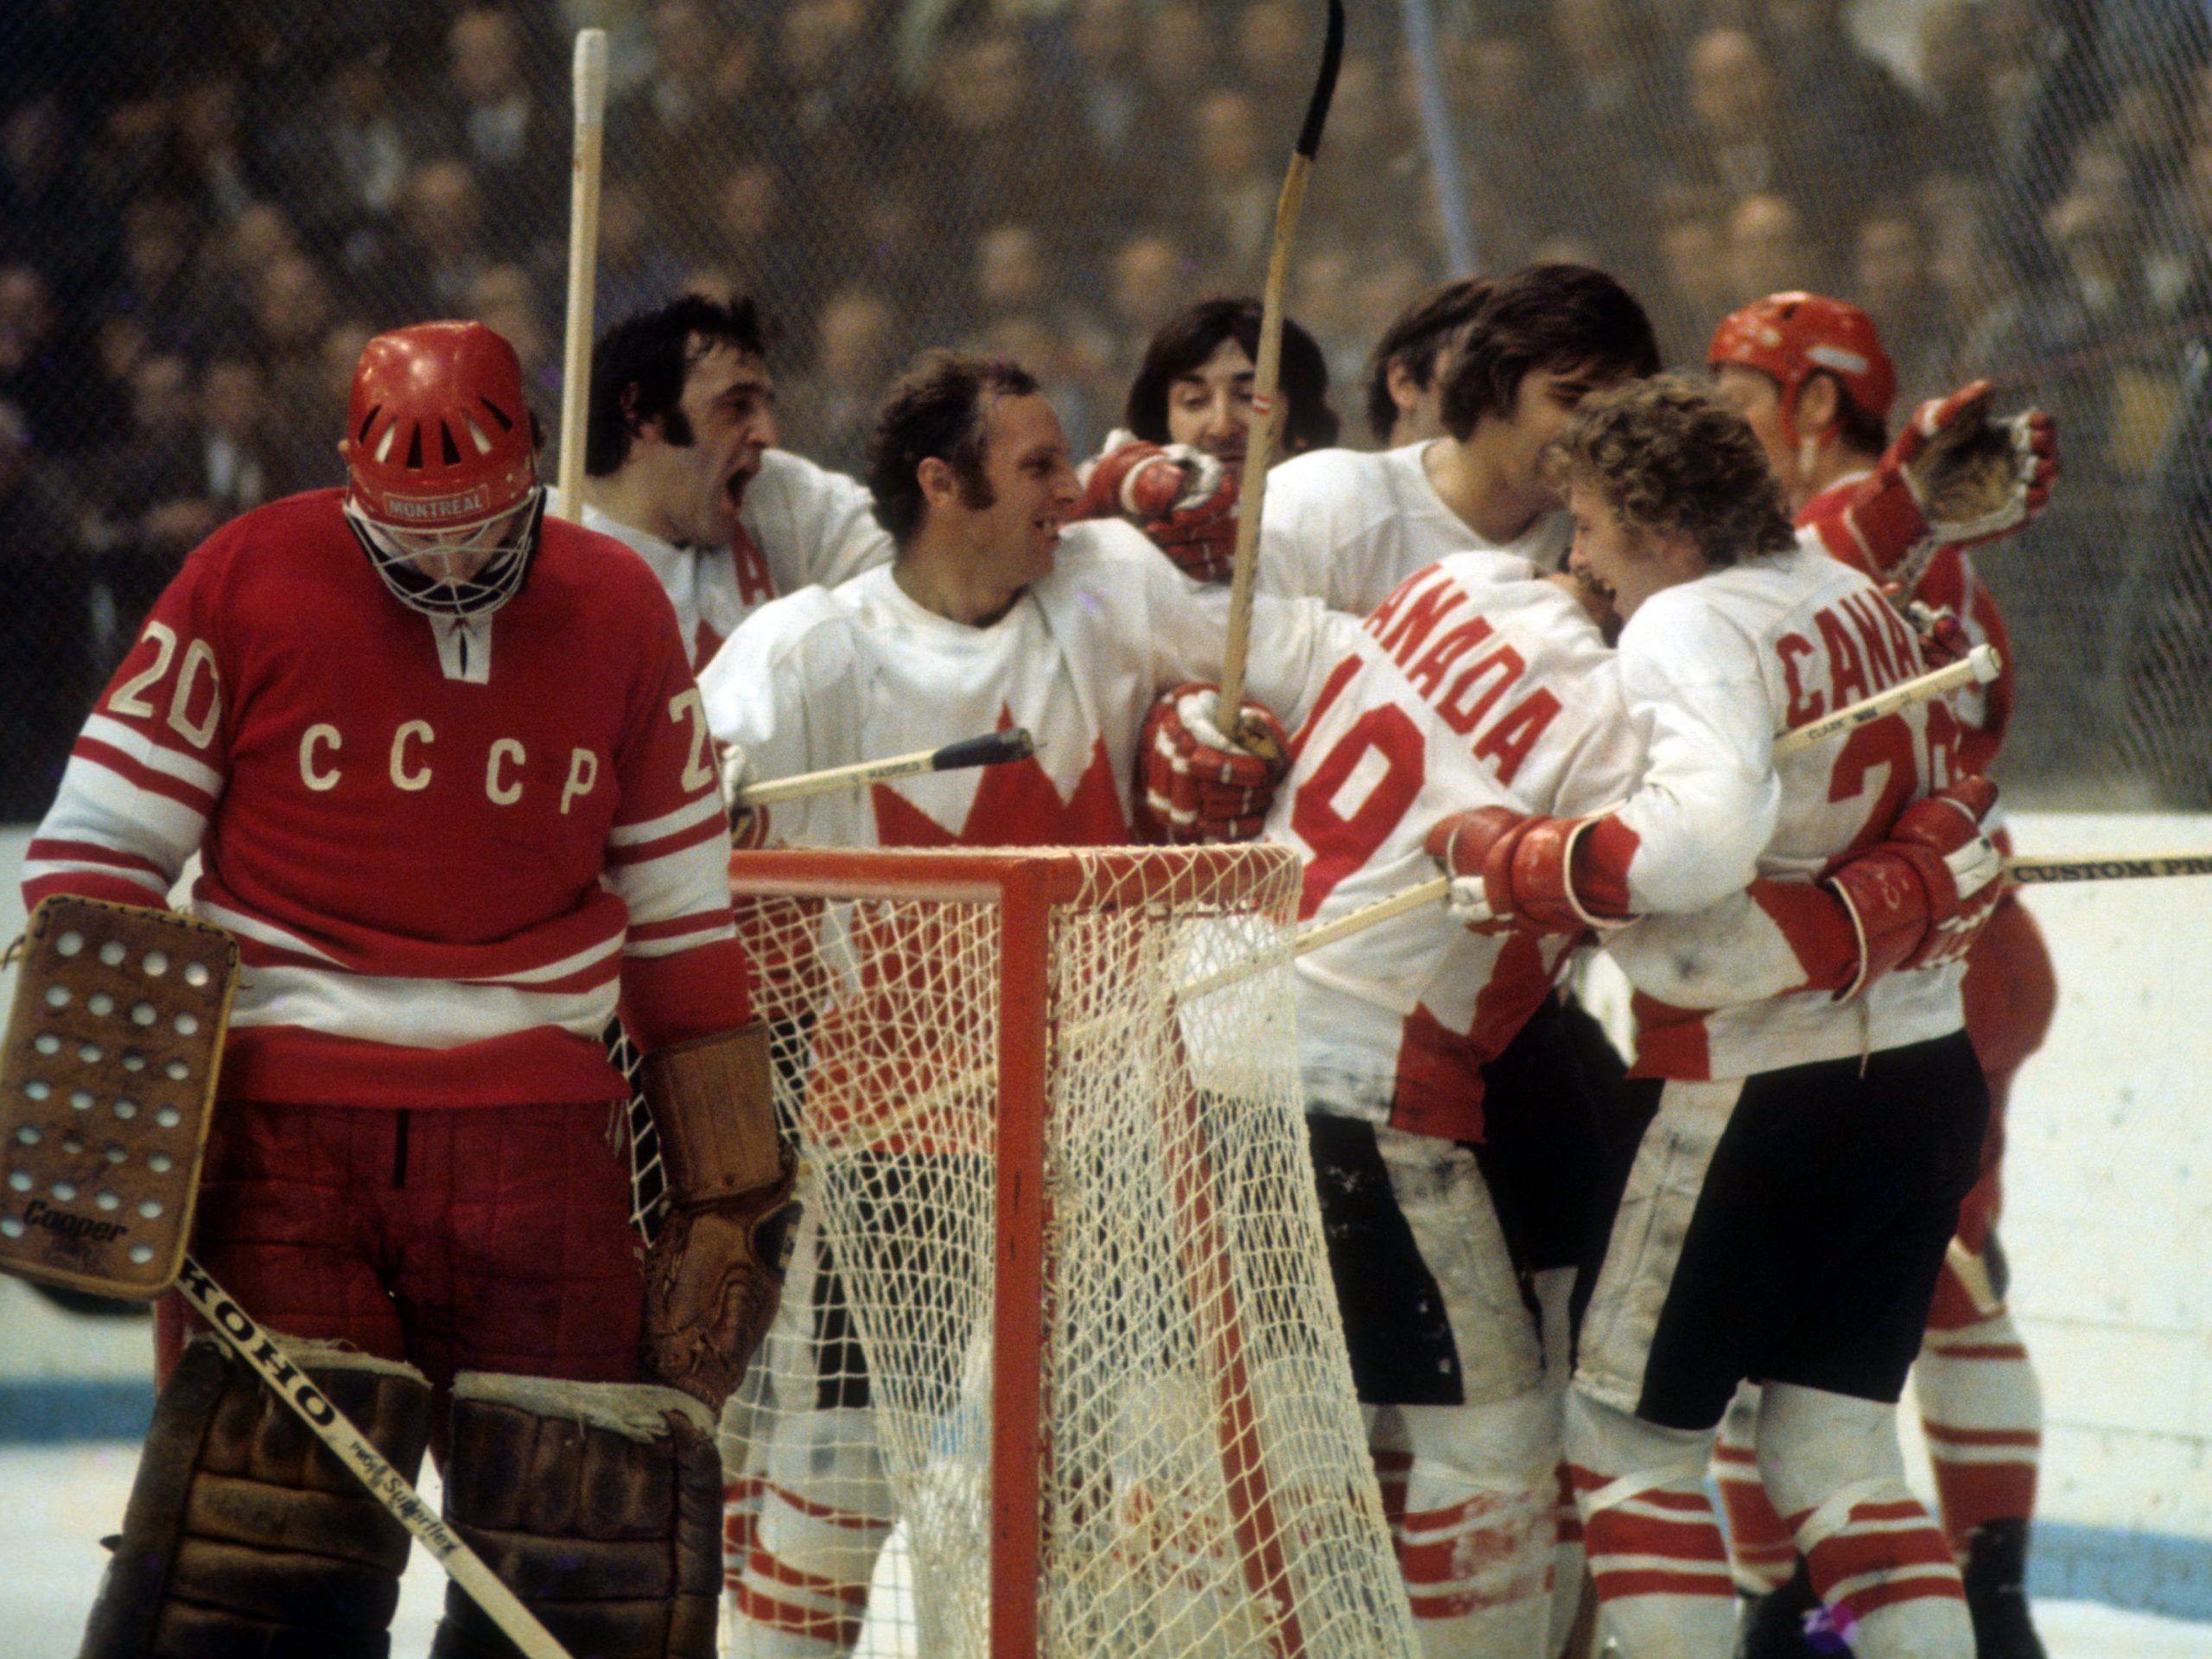 1972 Hockey Summit: 50 years ago a single goal brought Canadians